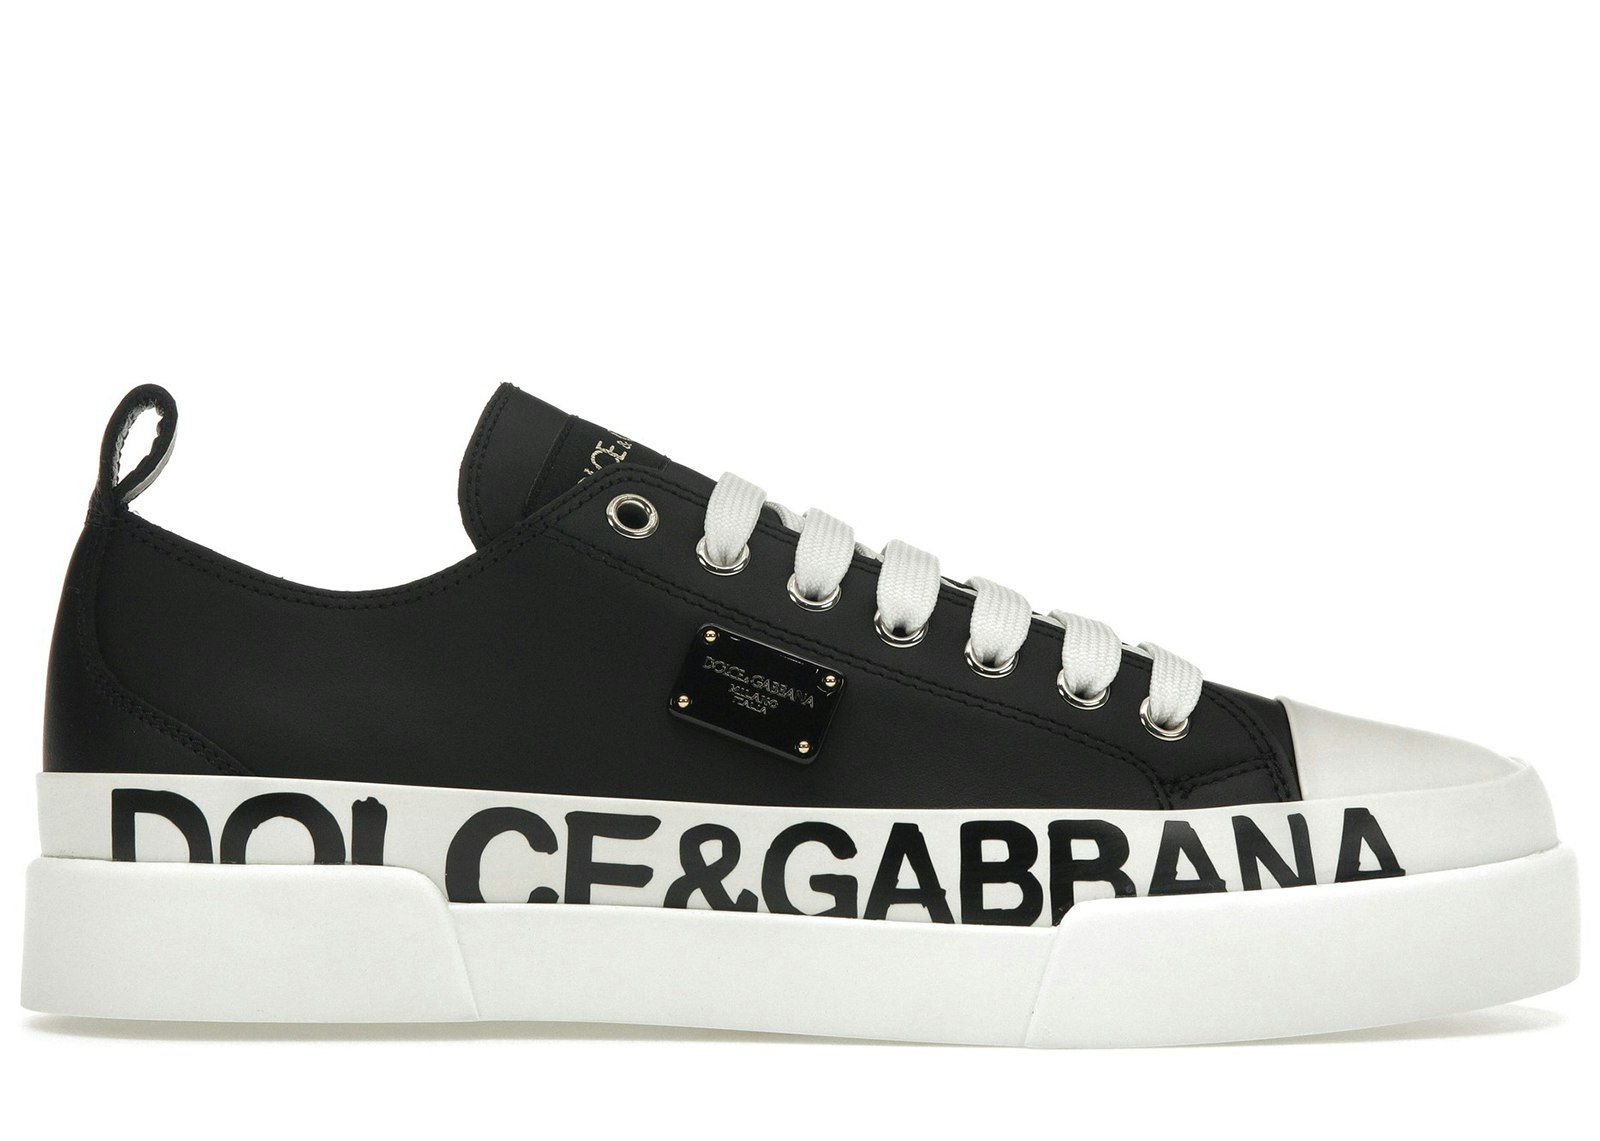 Dolce & Gabbana Shoes in Nigeria for sale ▷ Prices on Jiji.ng